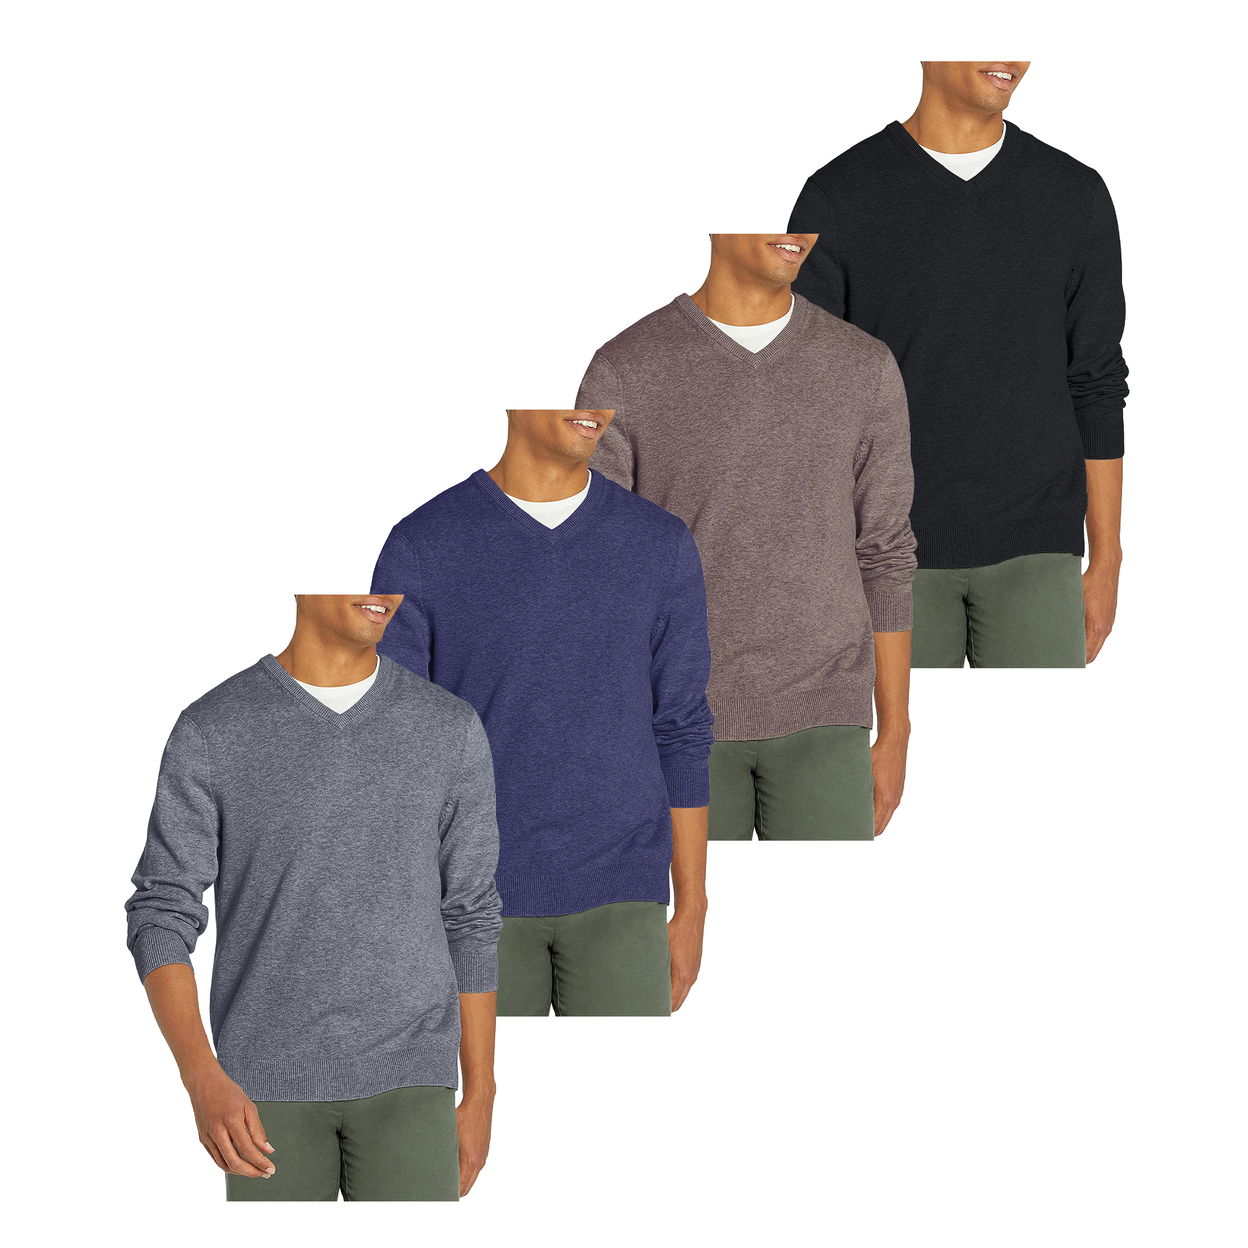 2-Pack: Men's Casual Ultra Soft Slim Fit Warm Knit V-Neck Sweater - Black & Grey, Small